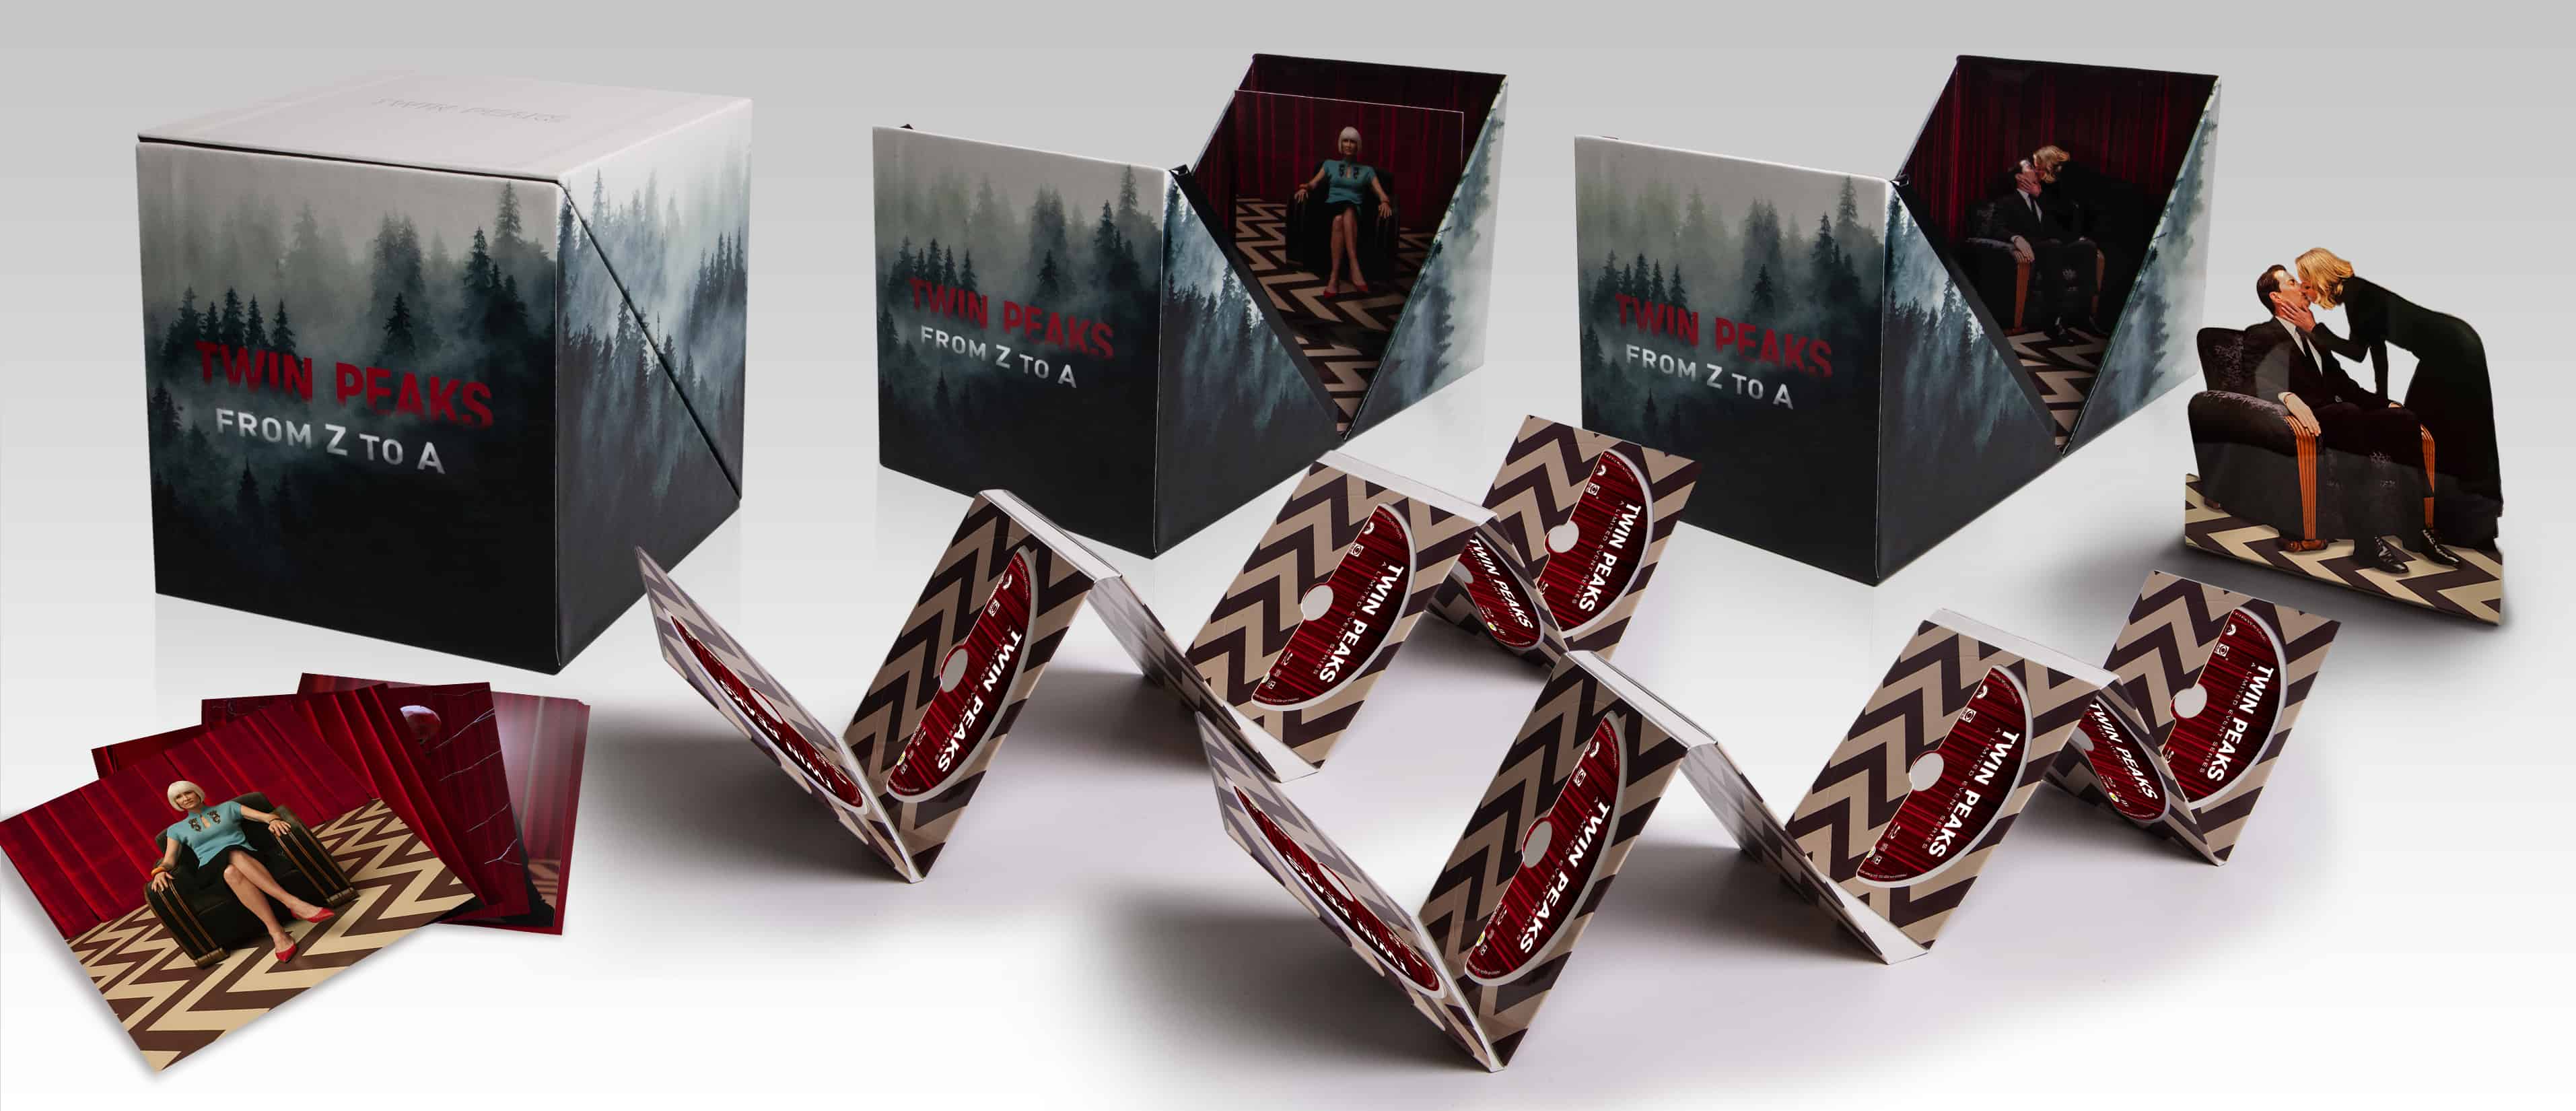 Twin Peaks: From Z to A Blu-ray Box Set